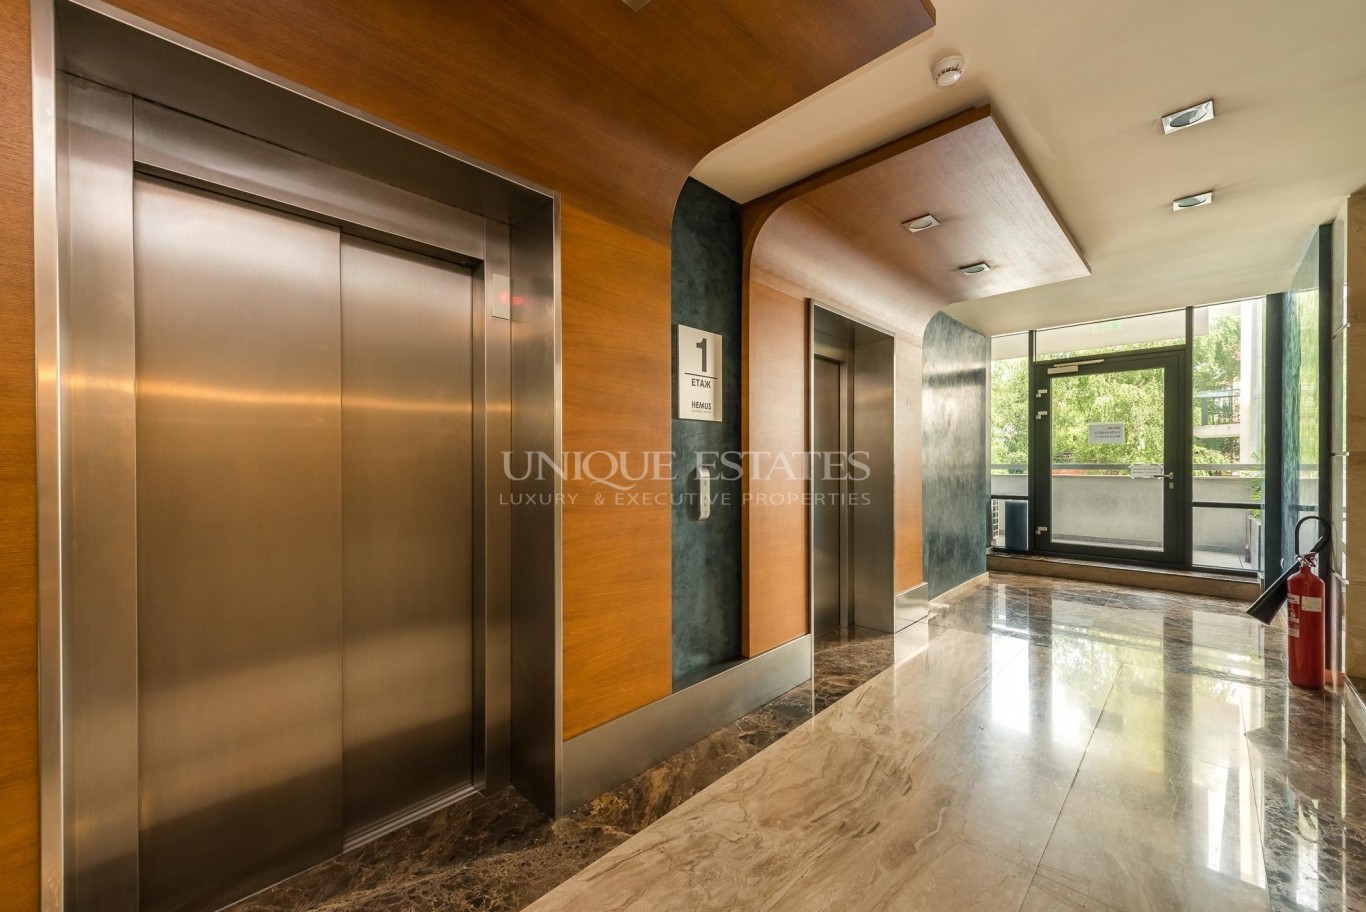 Office for sale in Sofia, Lozenets with listing ID: K8735 - image 10